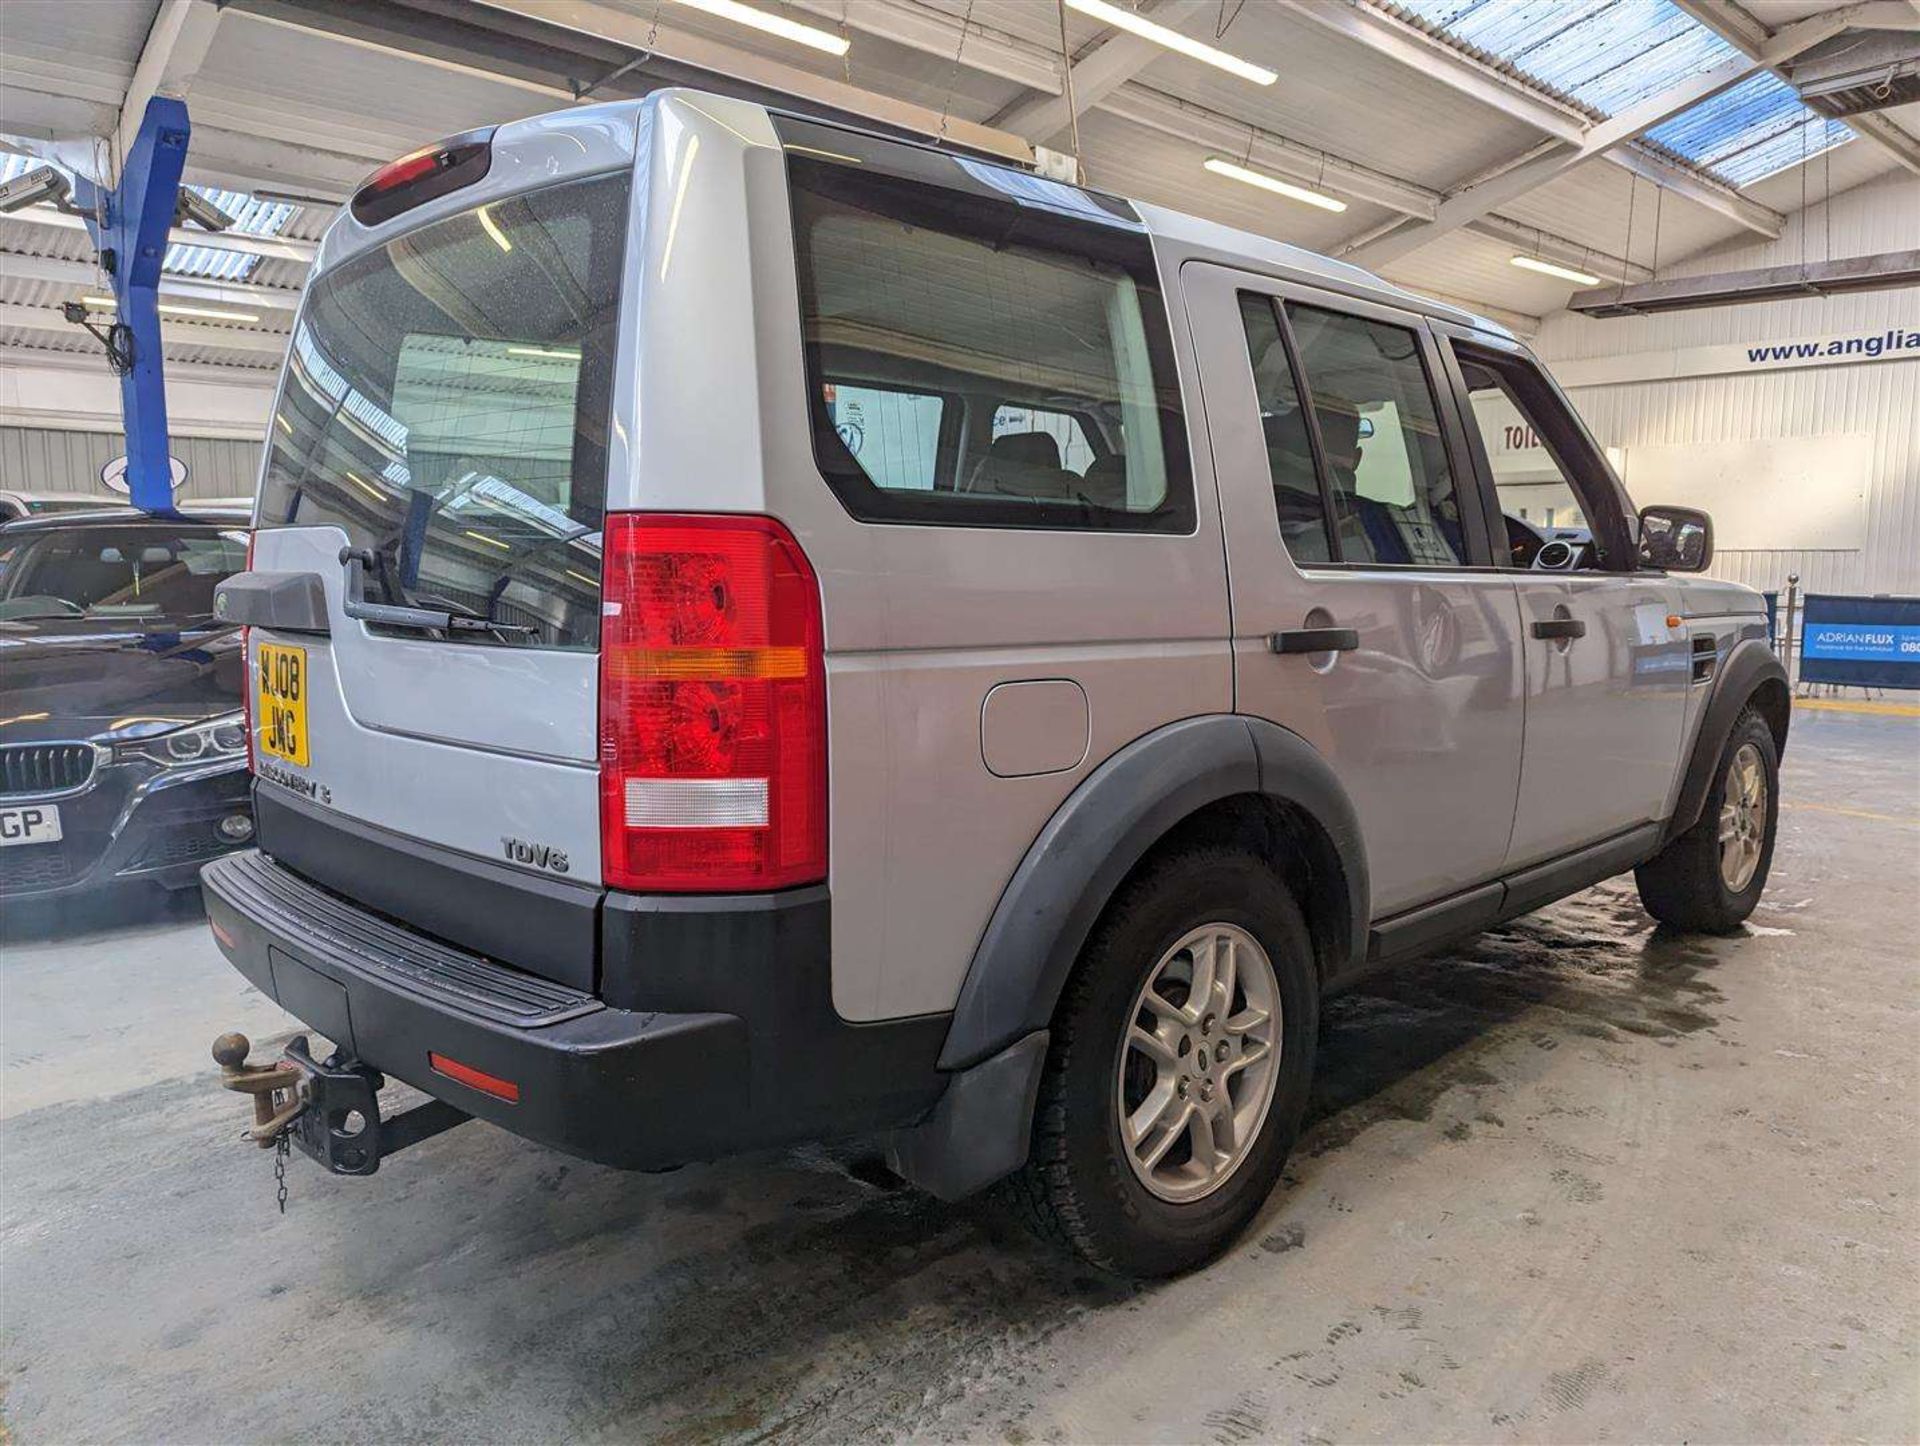 2008 LAND ROVER DISCOVERY TDV6 - Image 8 of 30